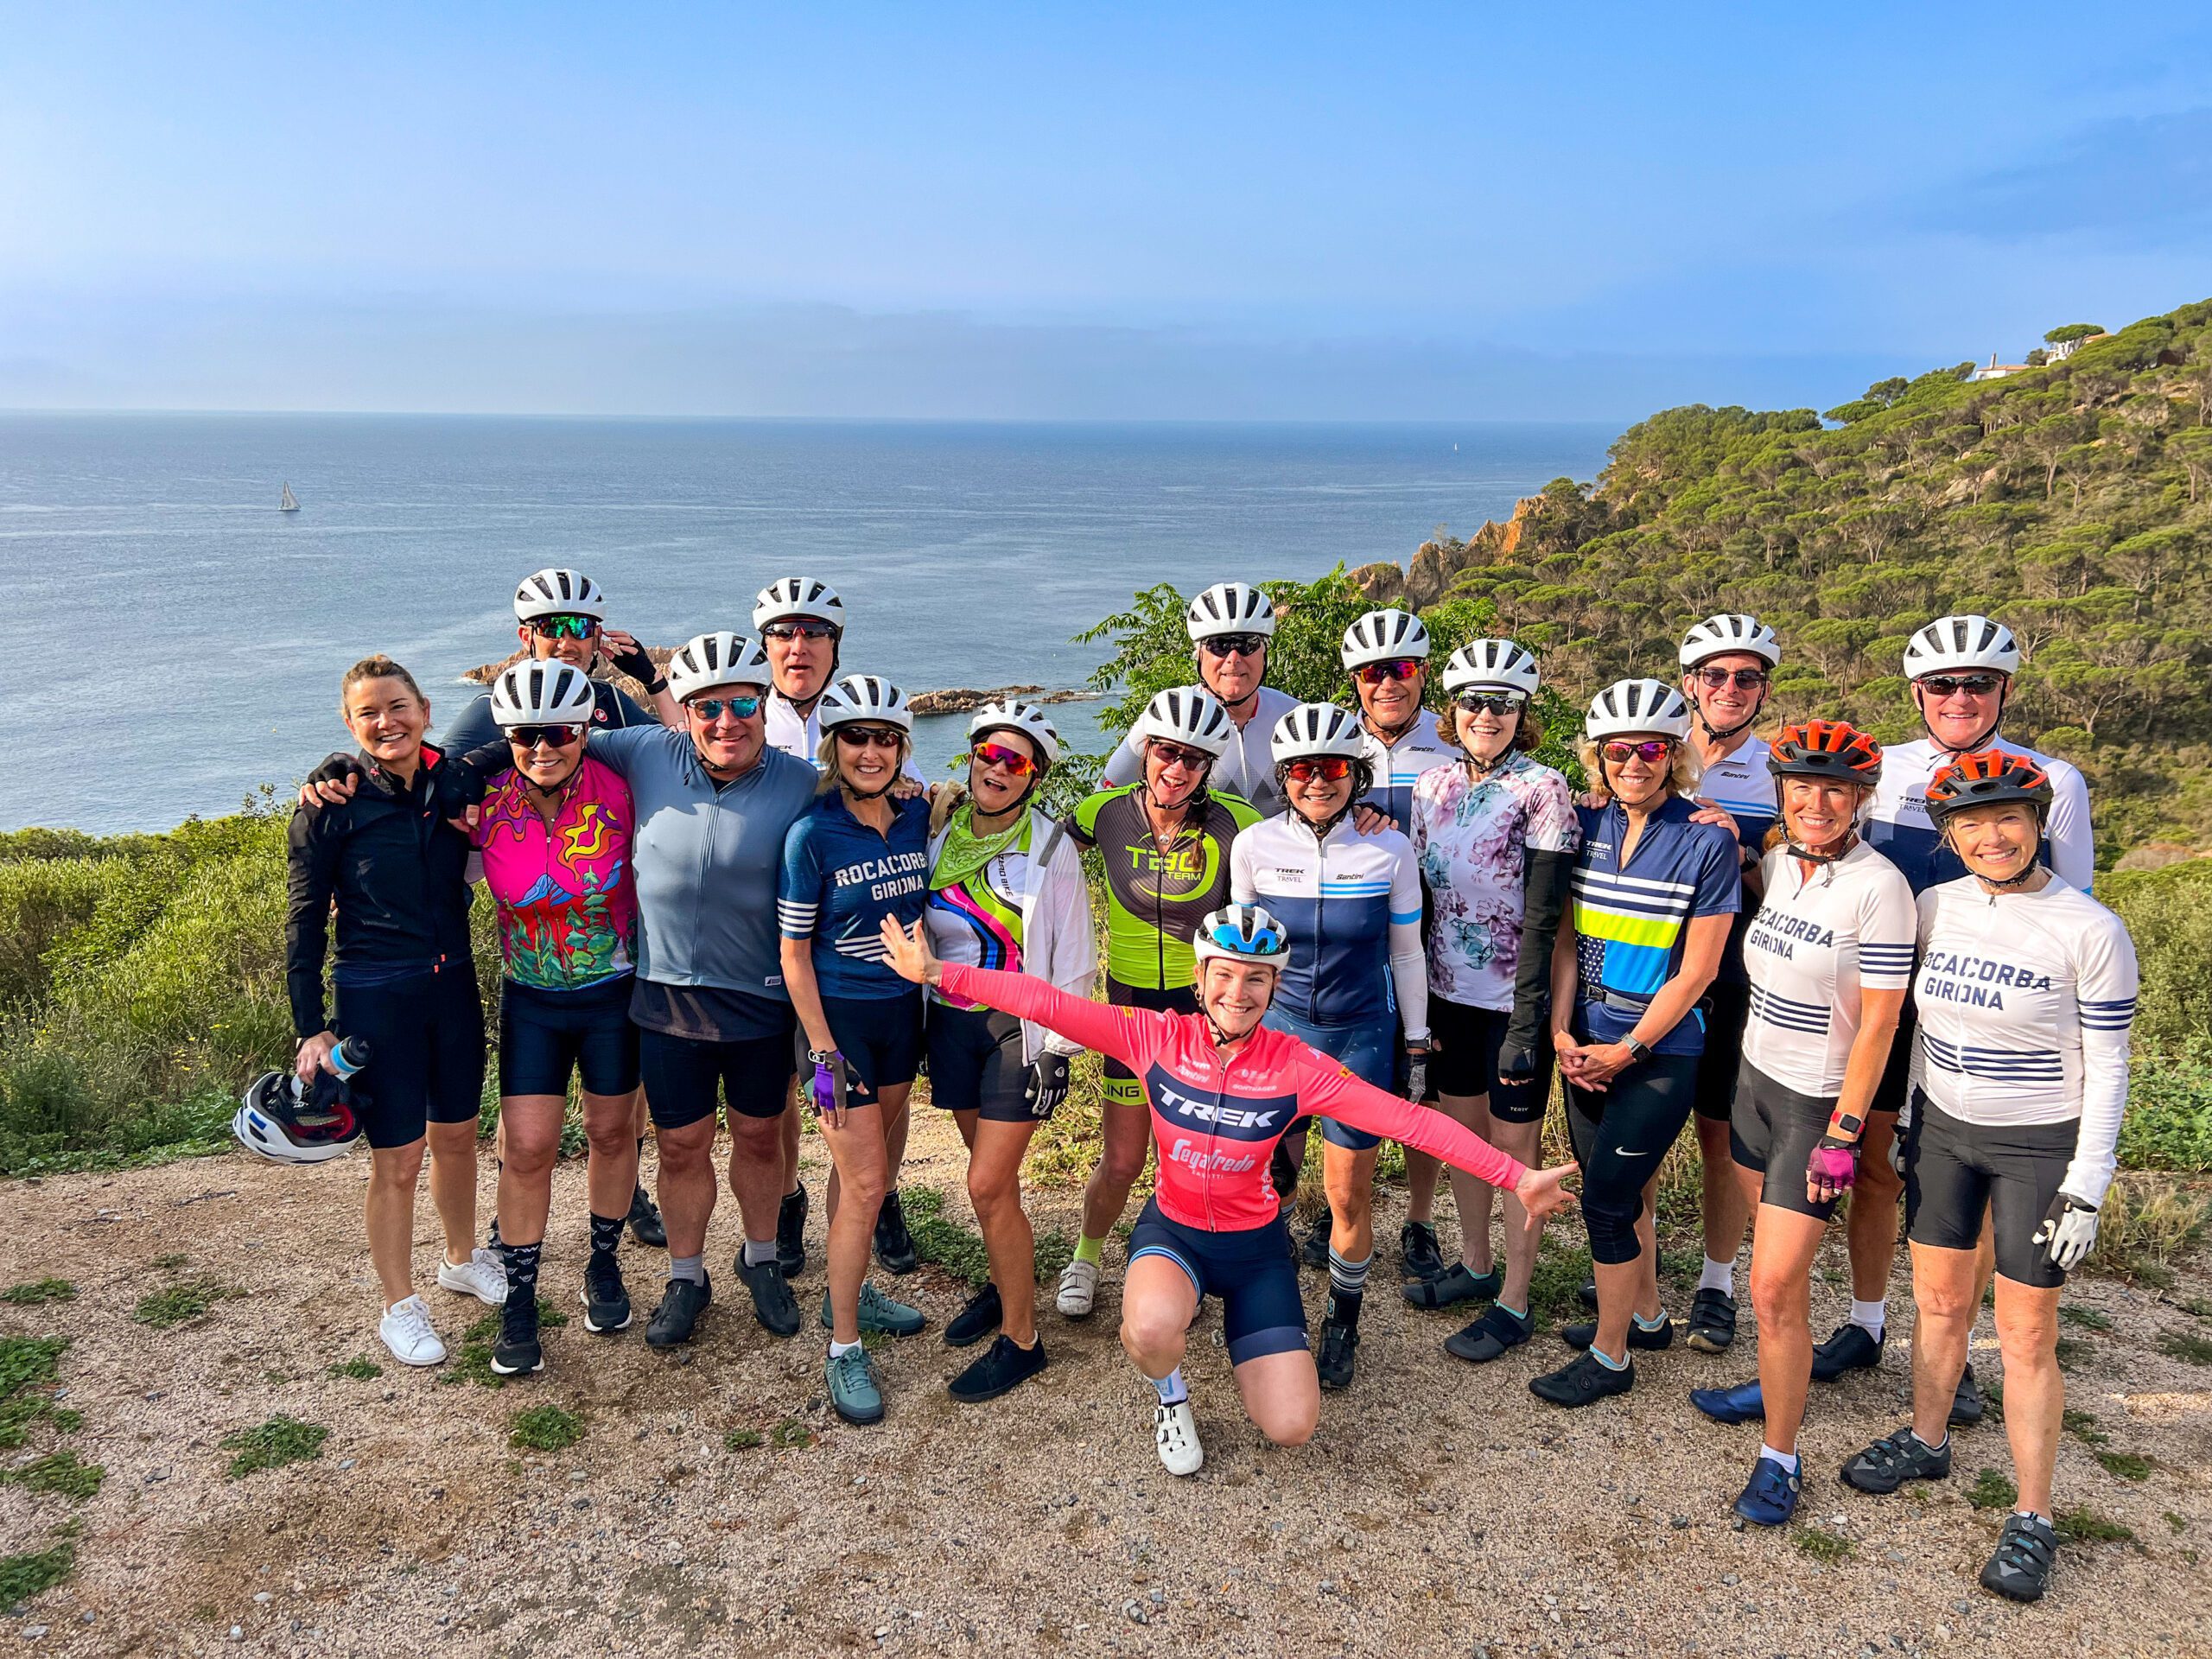 A group of people on a bike tour taking a group picture in front of a cliff in Spain